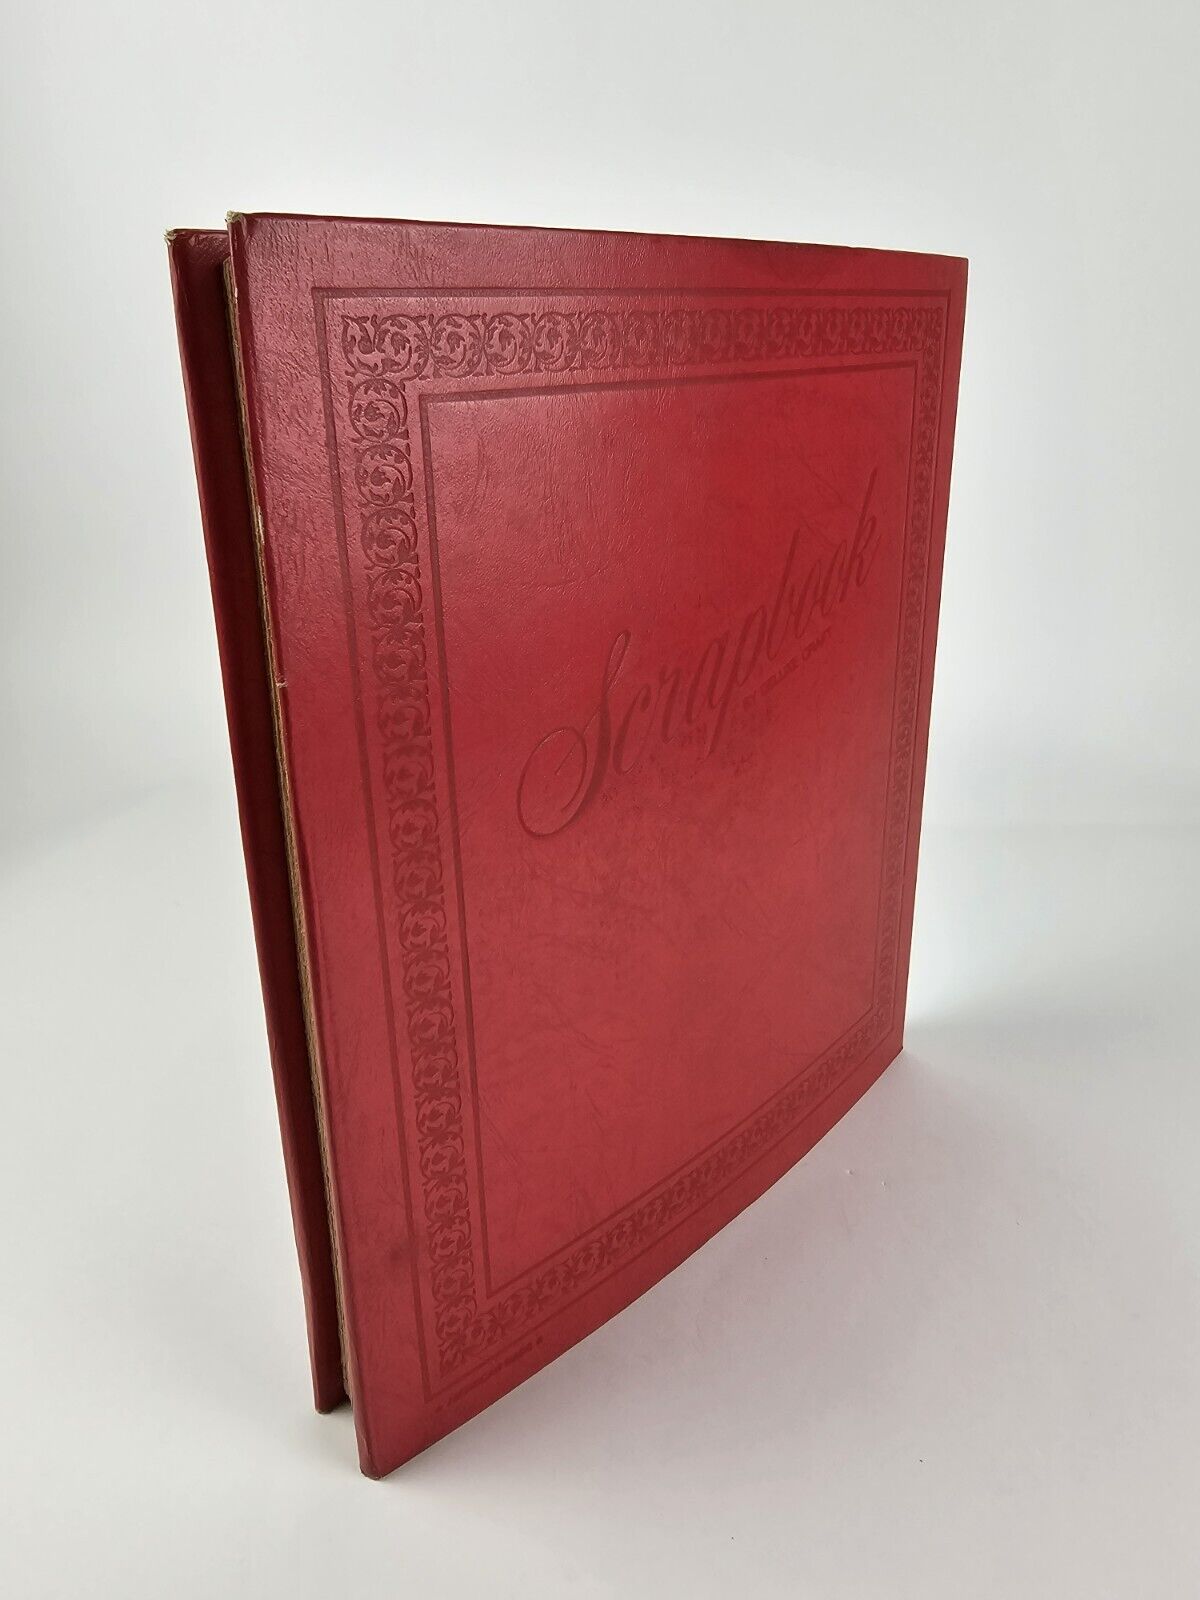 Vintage Empty Photograph Album Scrapbook Deluxe Craft Book Red Cover Blank Pages